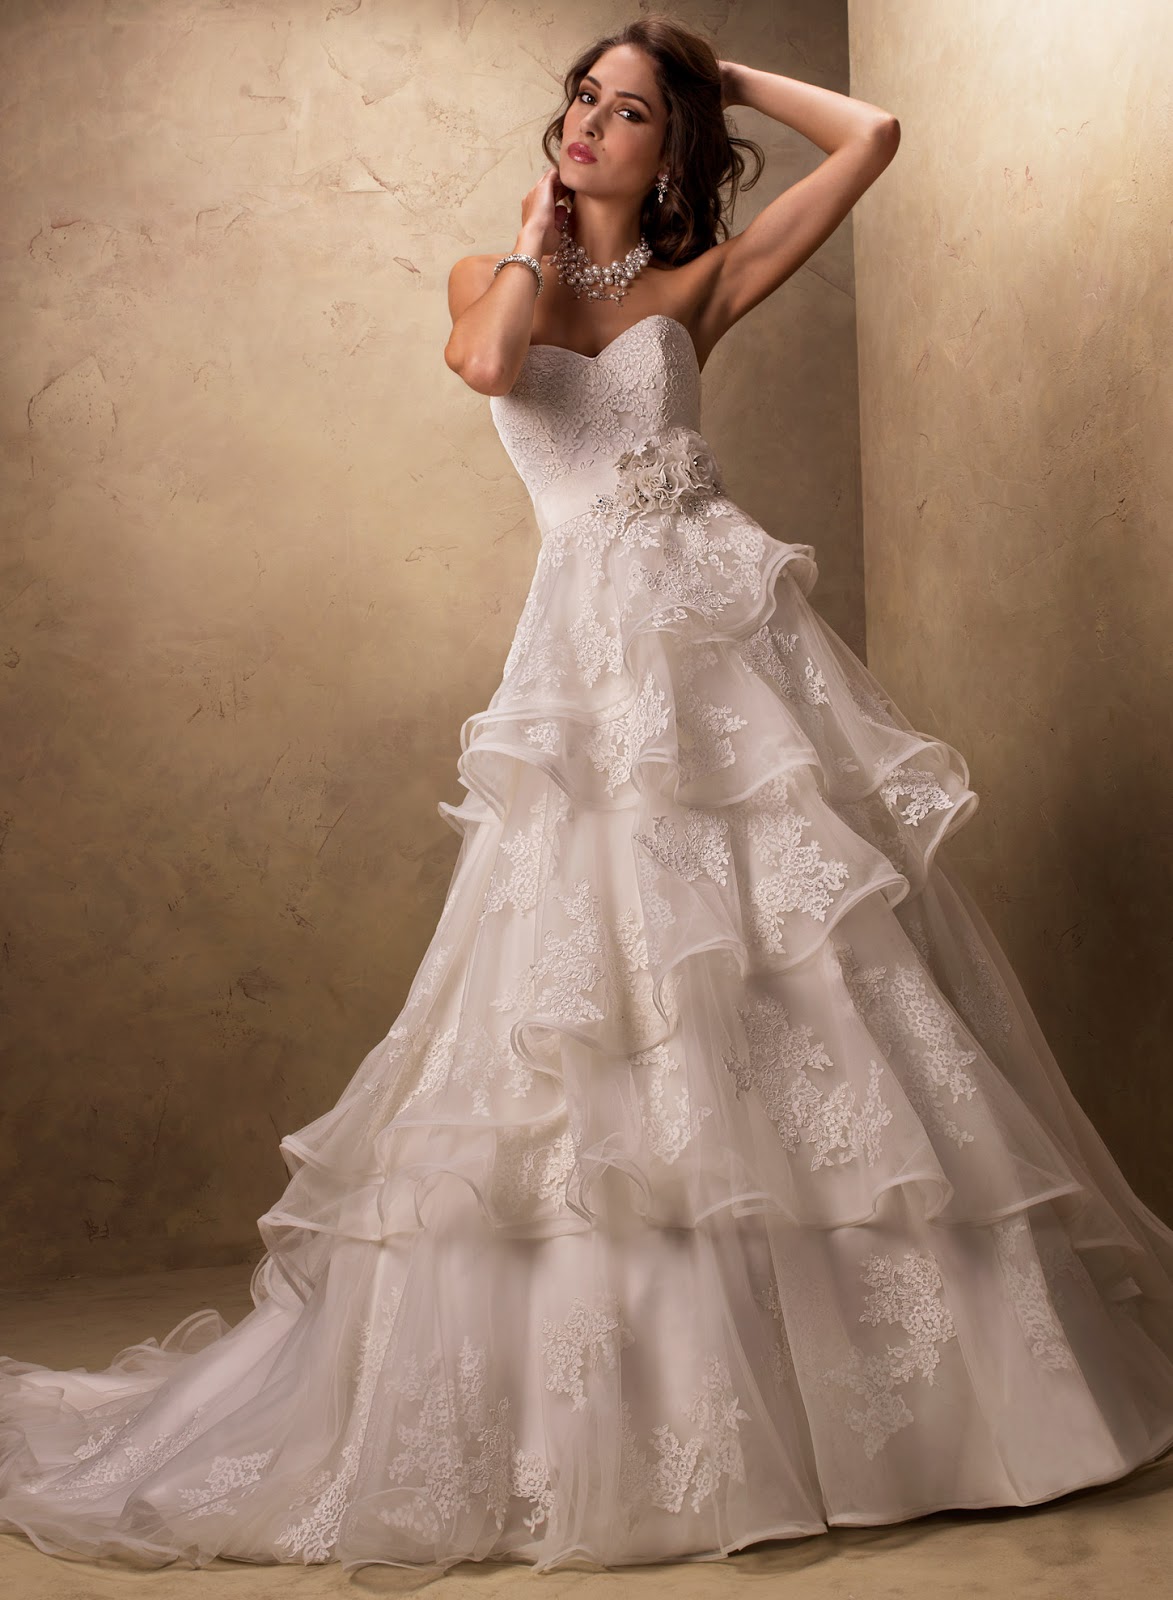 Blog of Wedding  and Occasion Wear May 2013